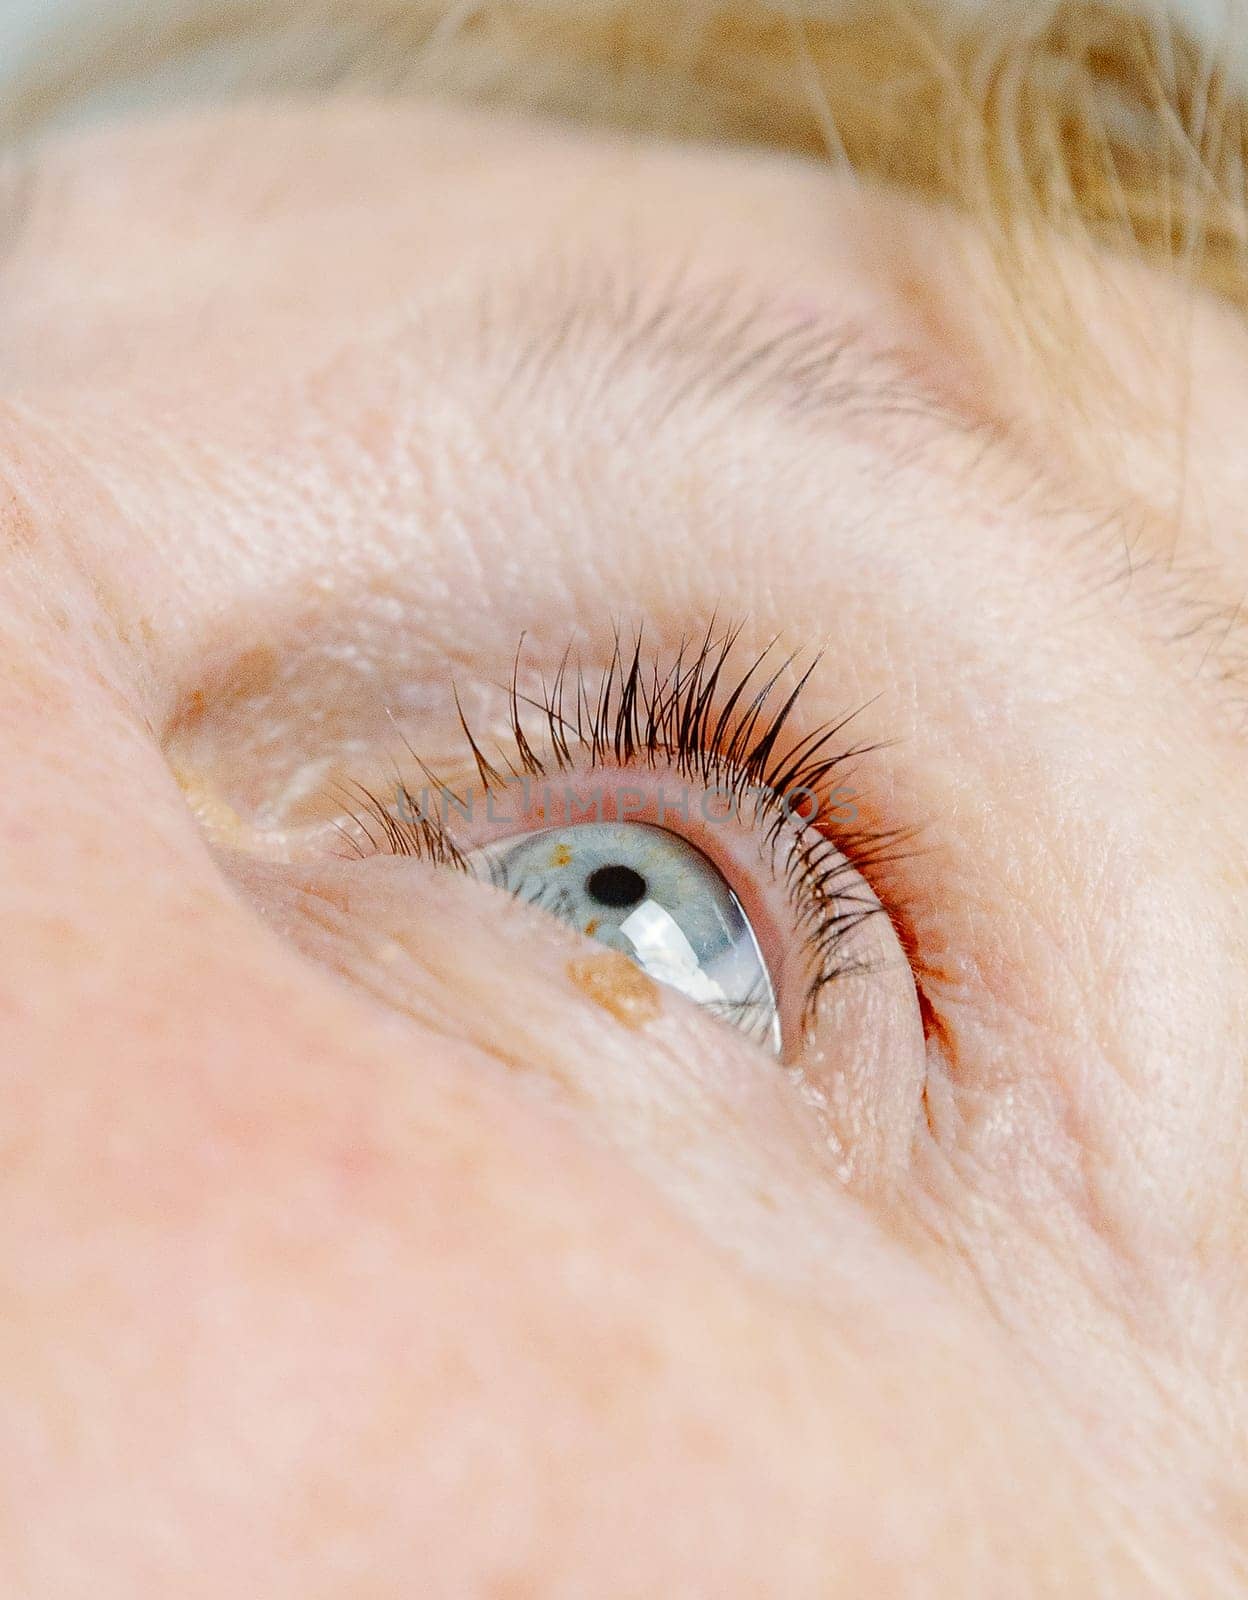 Portrait of a human female blue-gray eye with beautiful eyelashes of a Caucasian elderly woman, close-up side view.